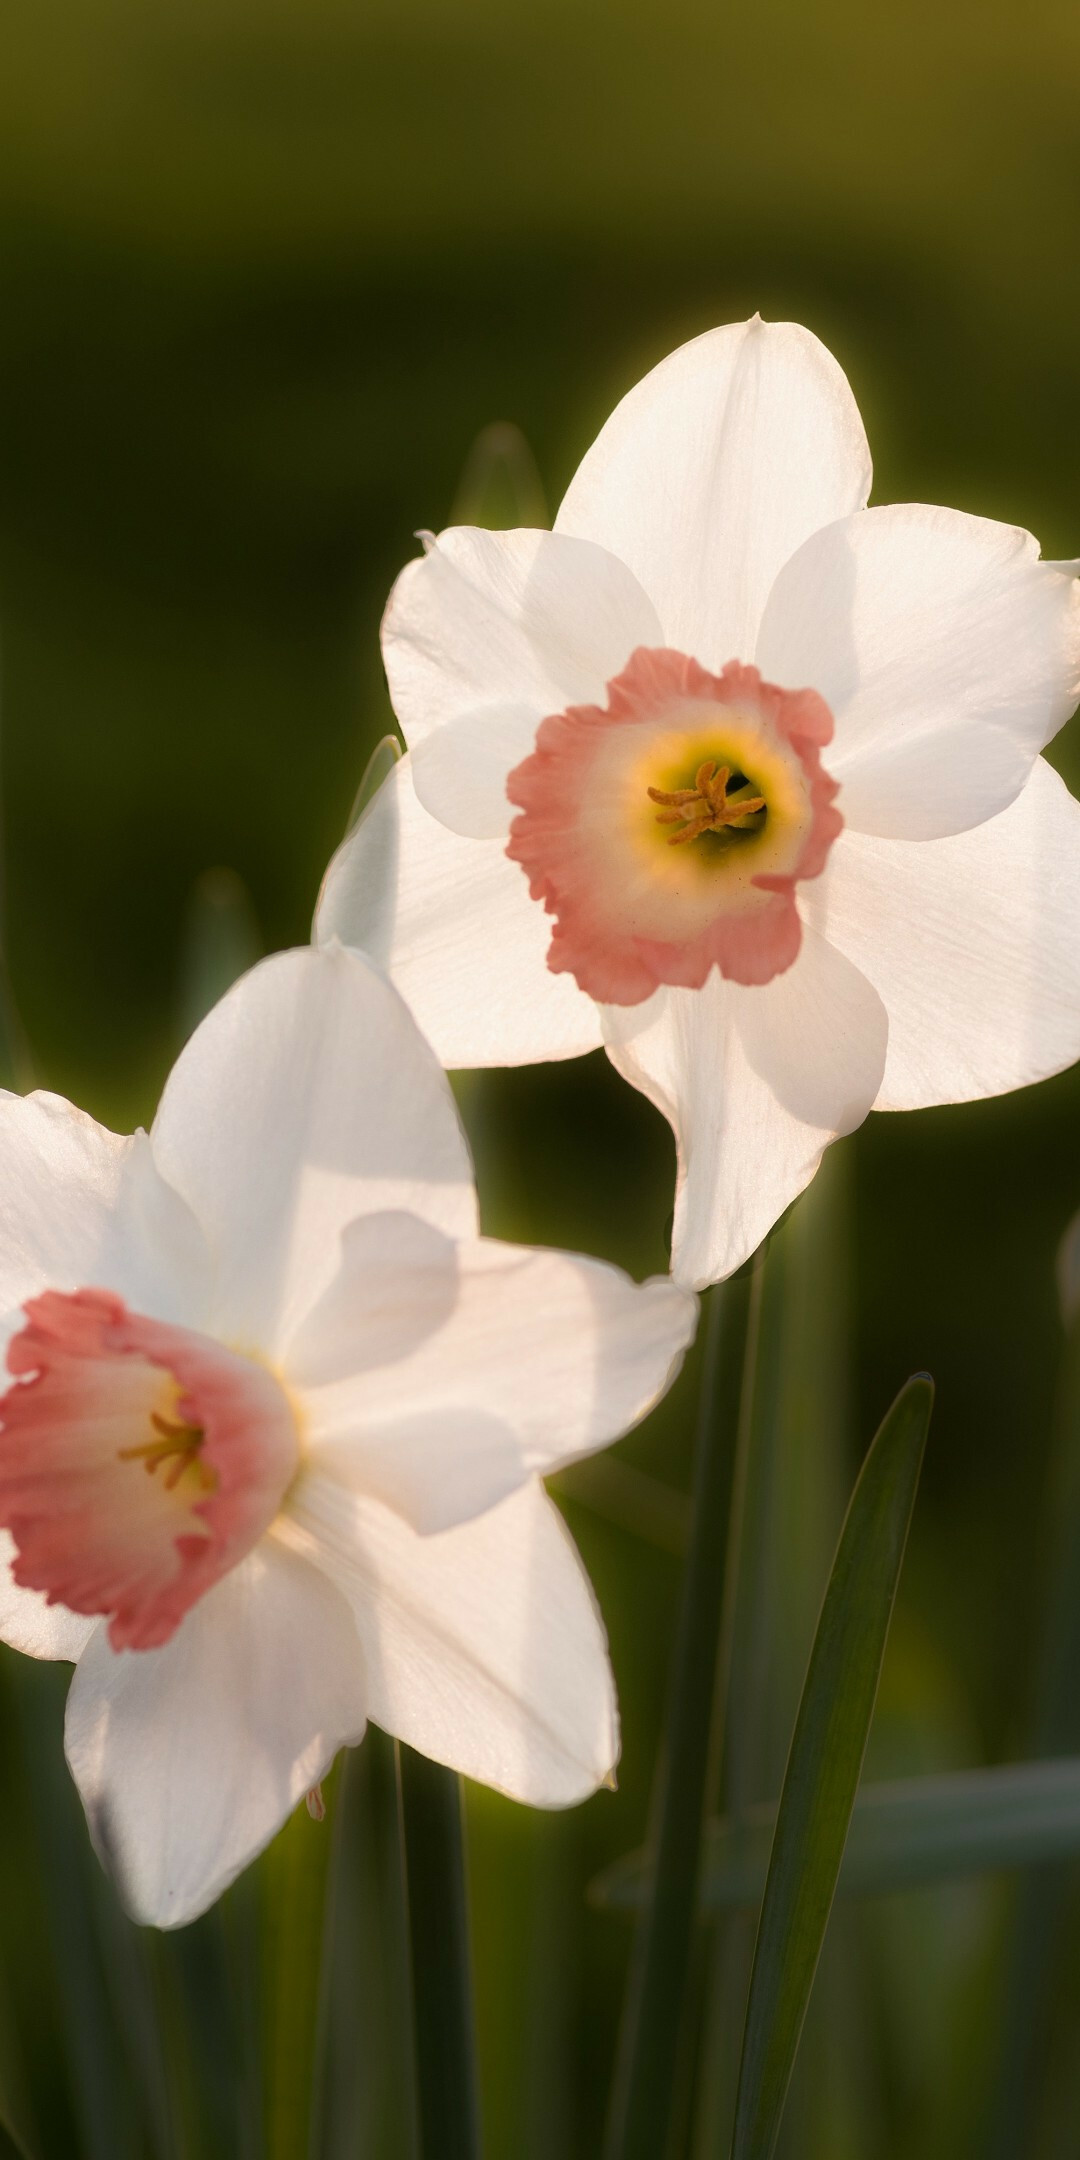 Daffodil: The national flower of Wales, Terrestrial plant. 1080x2160 HD Wallpaper.